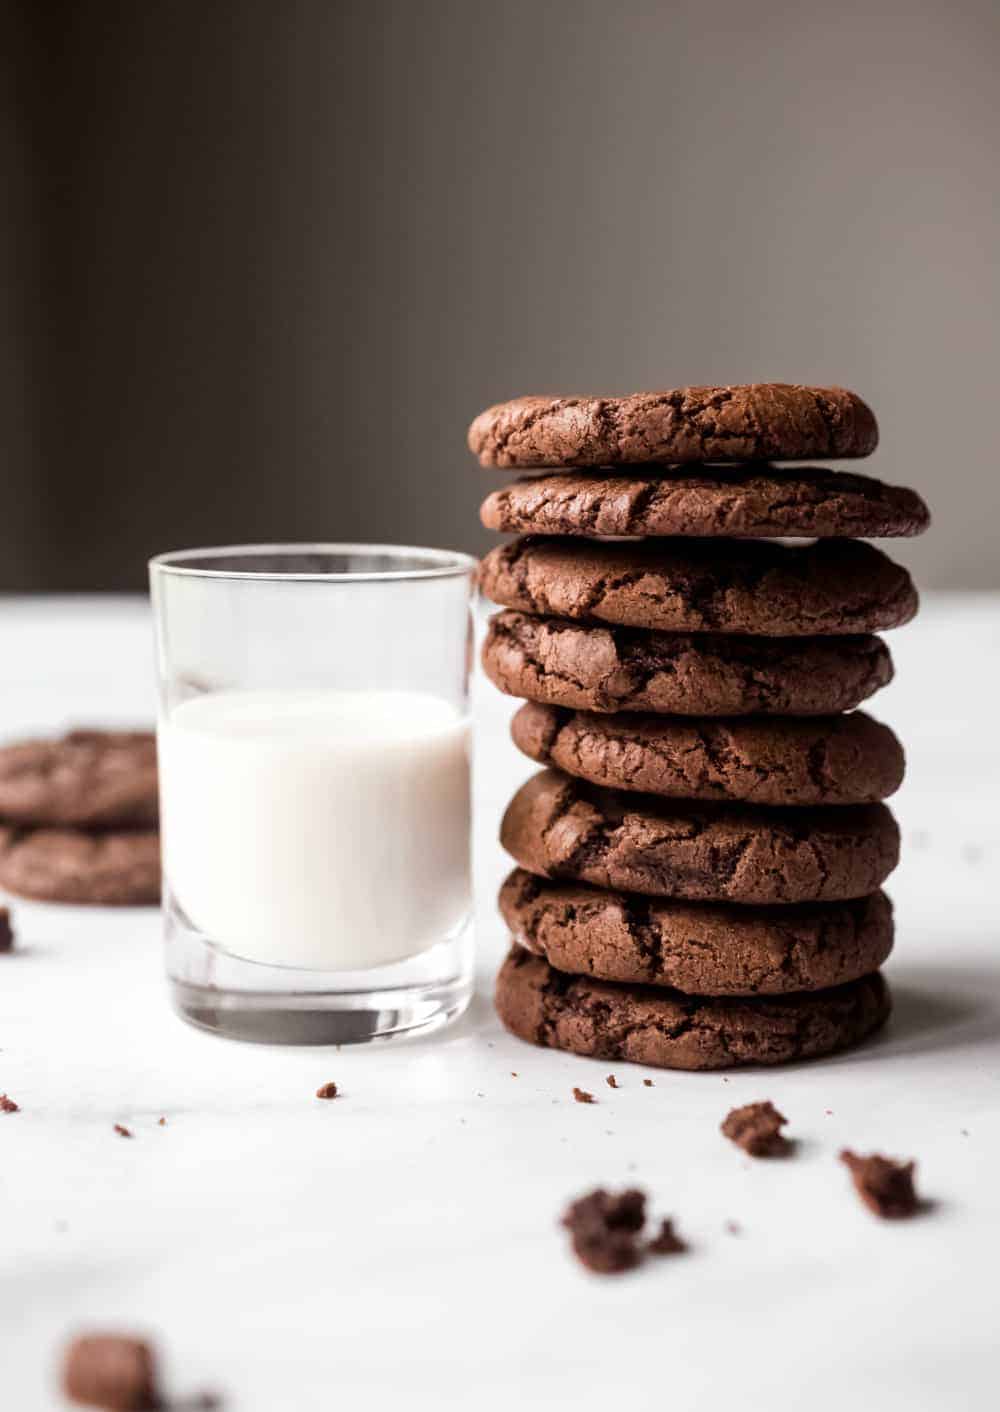 Side view of several mint chocolate cookies stacked next to a glass of milk